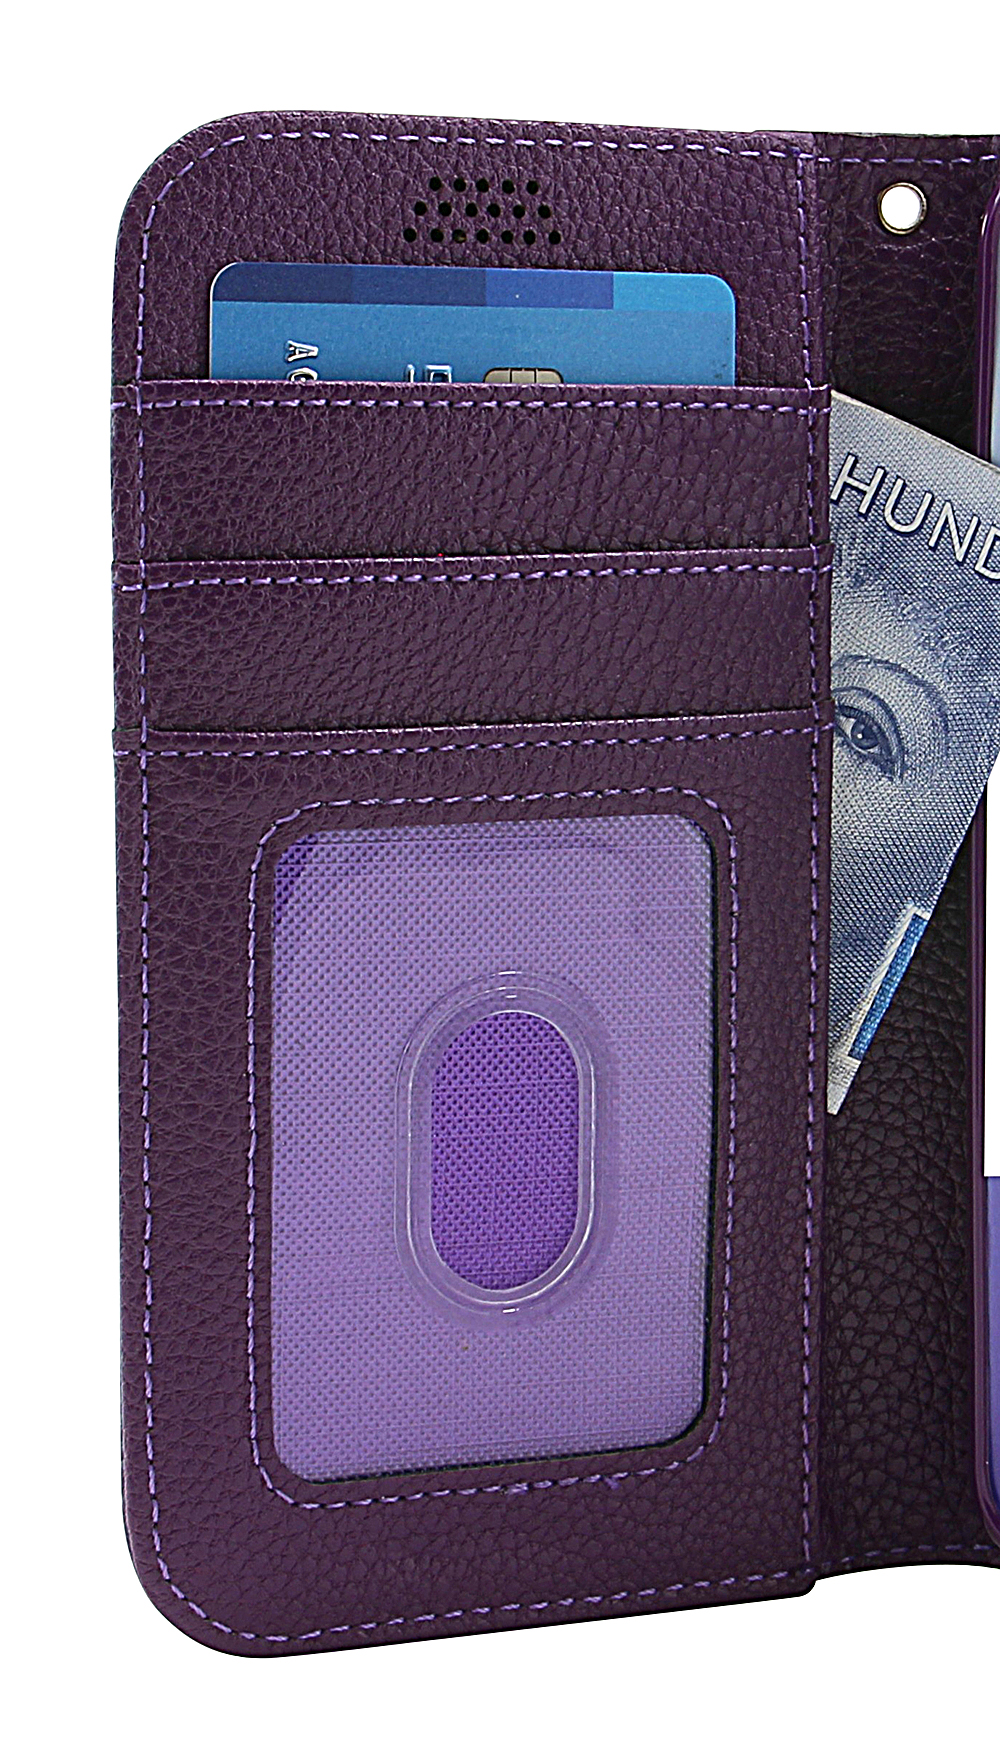 New Standcase Wallet Samsung Galaxy Xcover 4 (G390F)